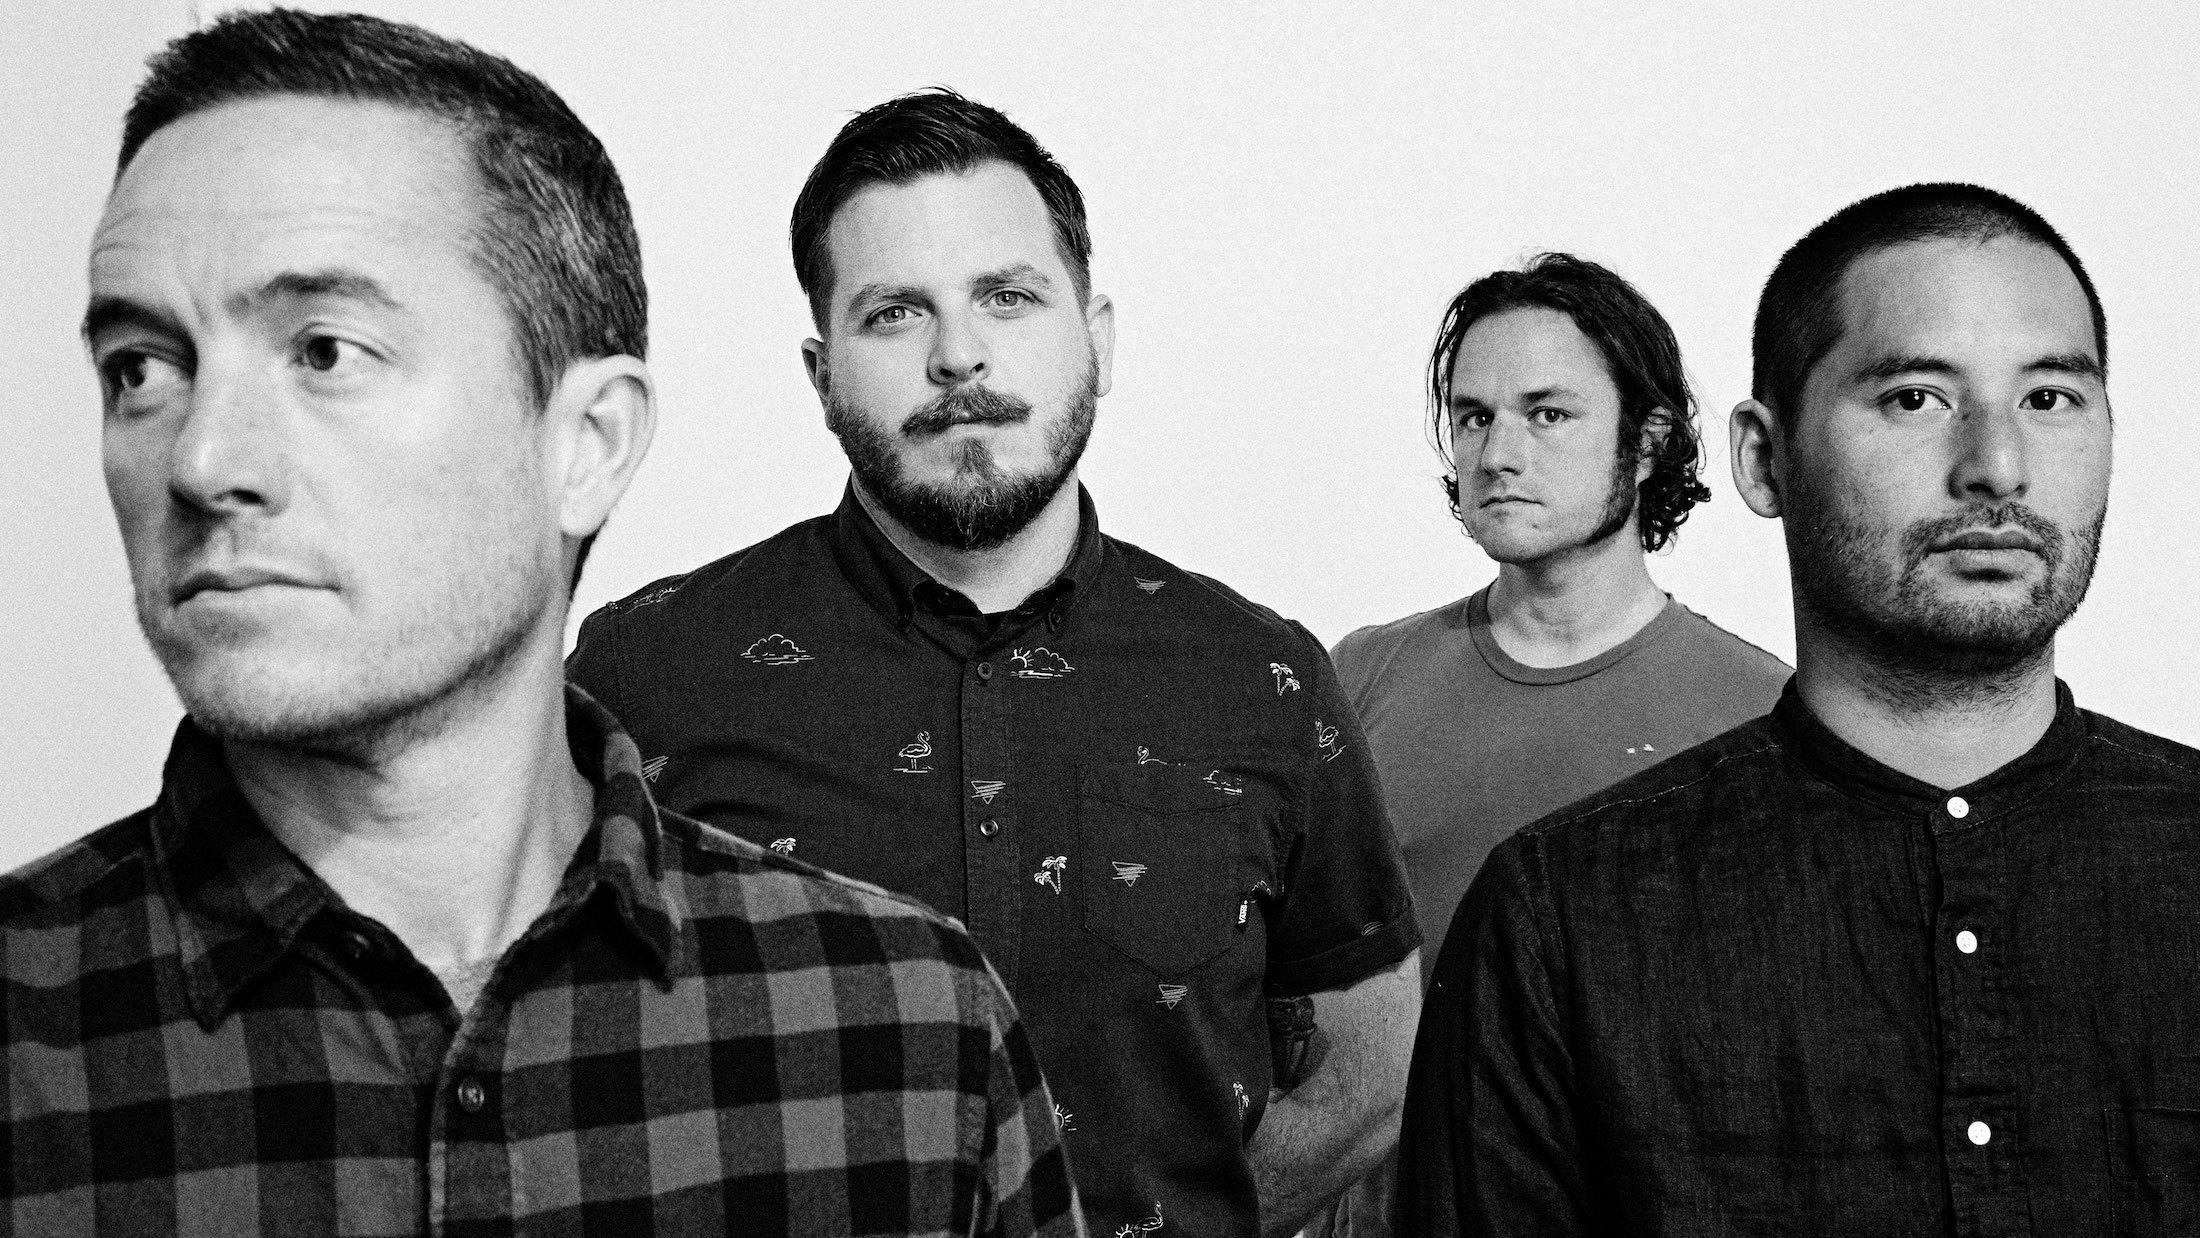 Thrice Release Thought-Provoking Video For Only Us